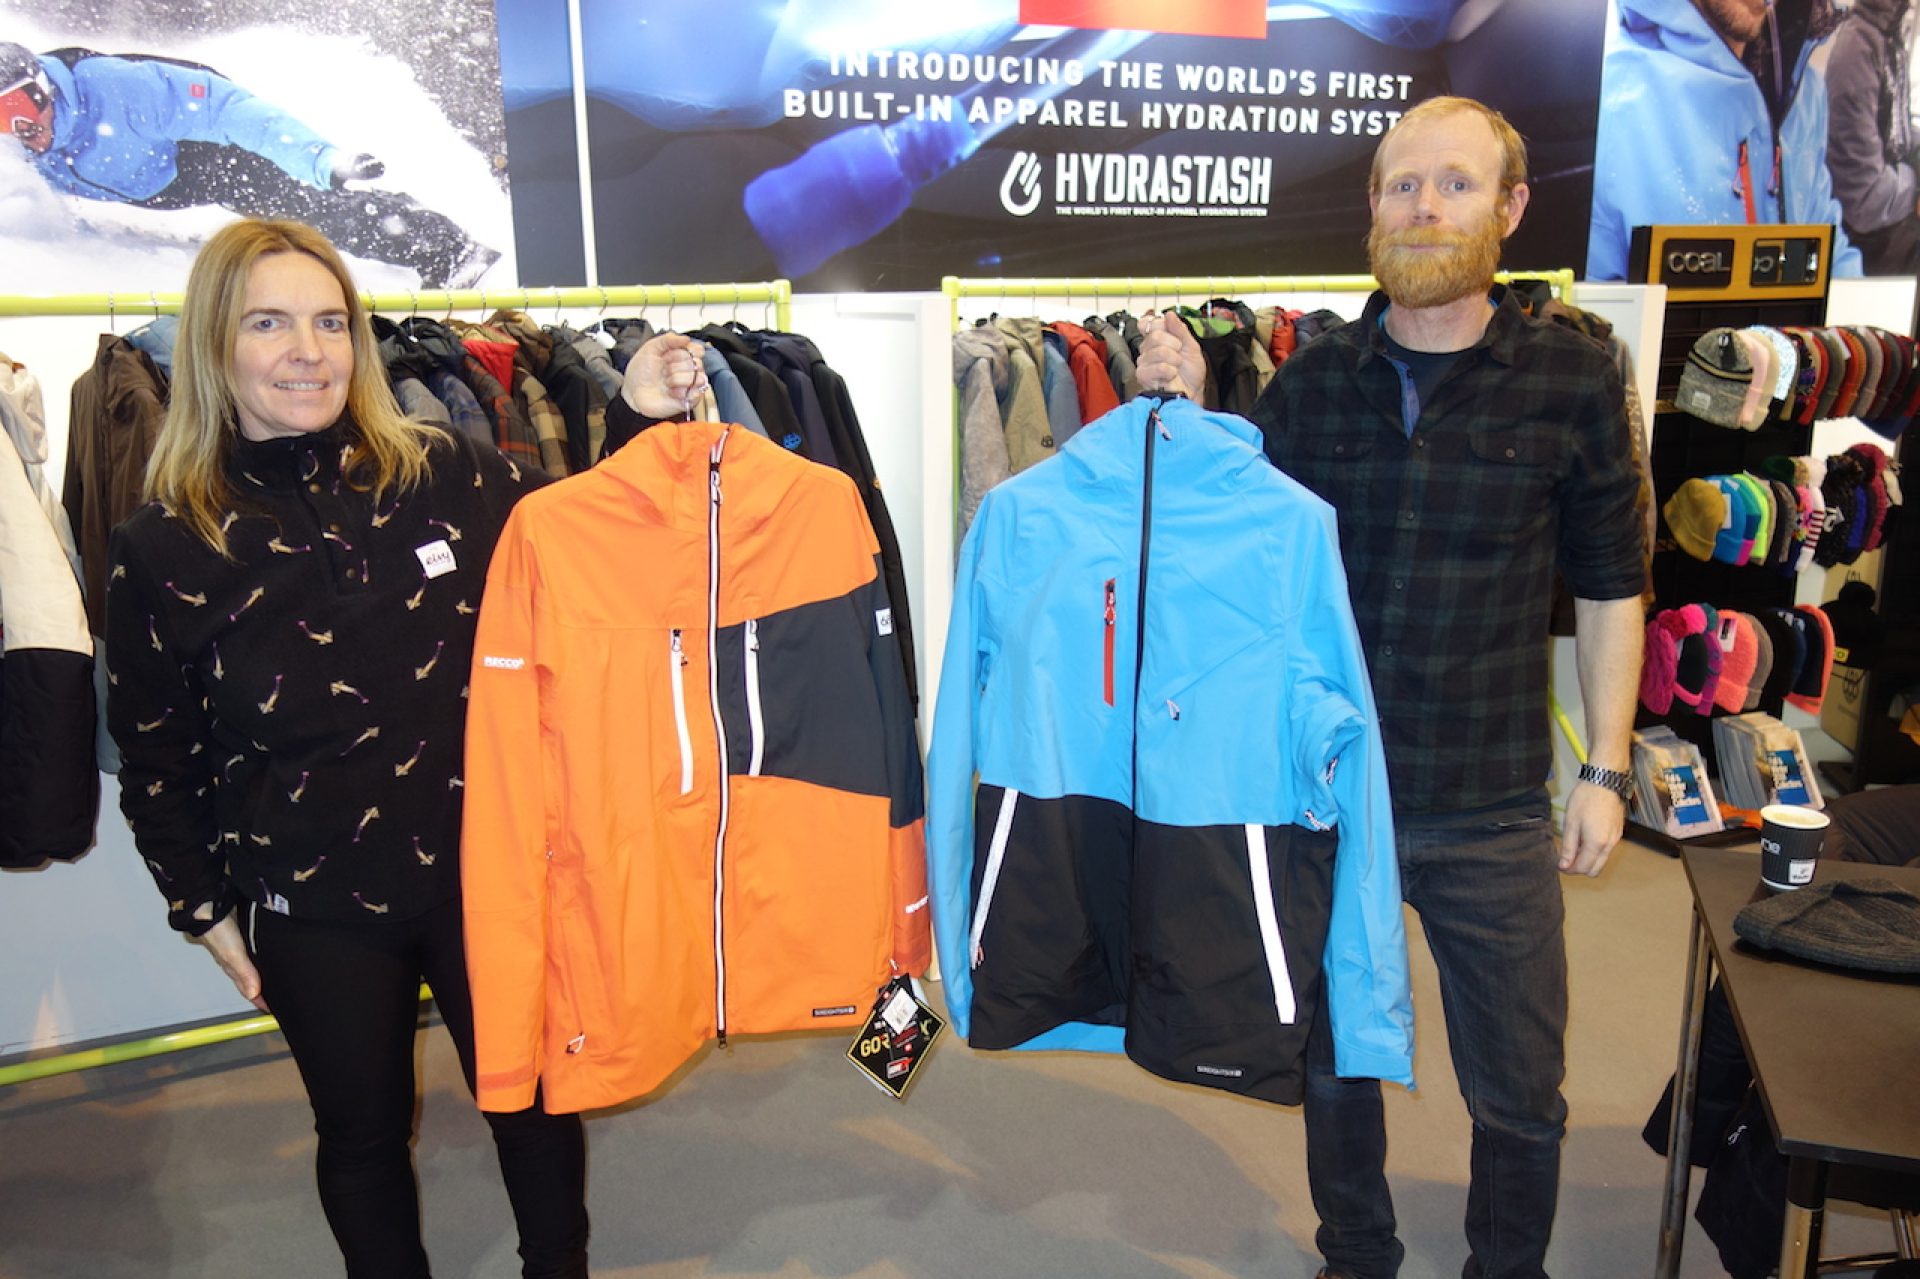 https://www.boardsportsource.com/wp-content/uploads/bfi_thumb/686-Lucy-showing-the-Weapon-jacket-and-Steve-with-their-all-new-Hydrastash-q3layitbpcjjwcawlhil2bfkdfnszm9uromwdfw1di.jpg